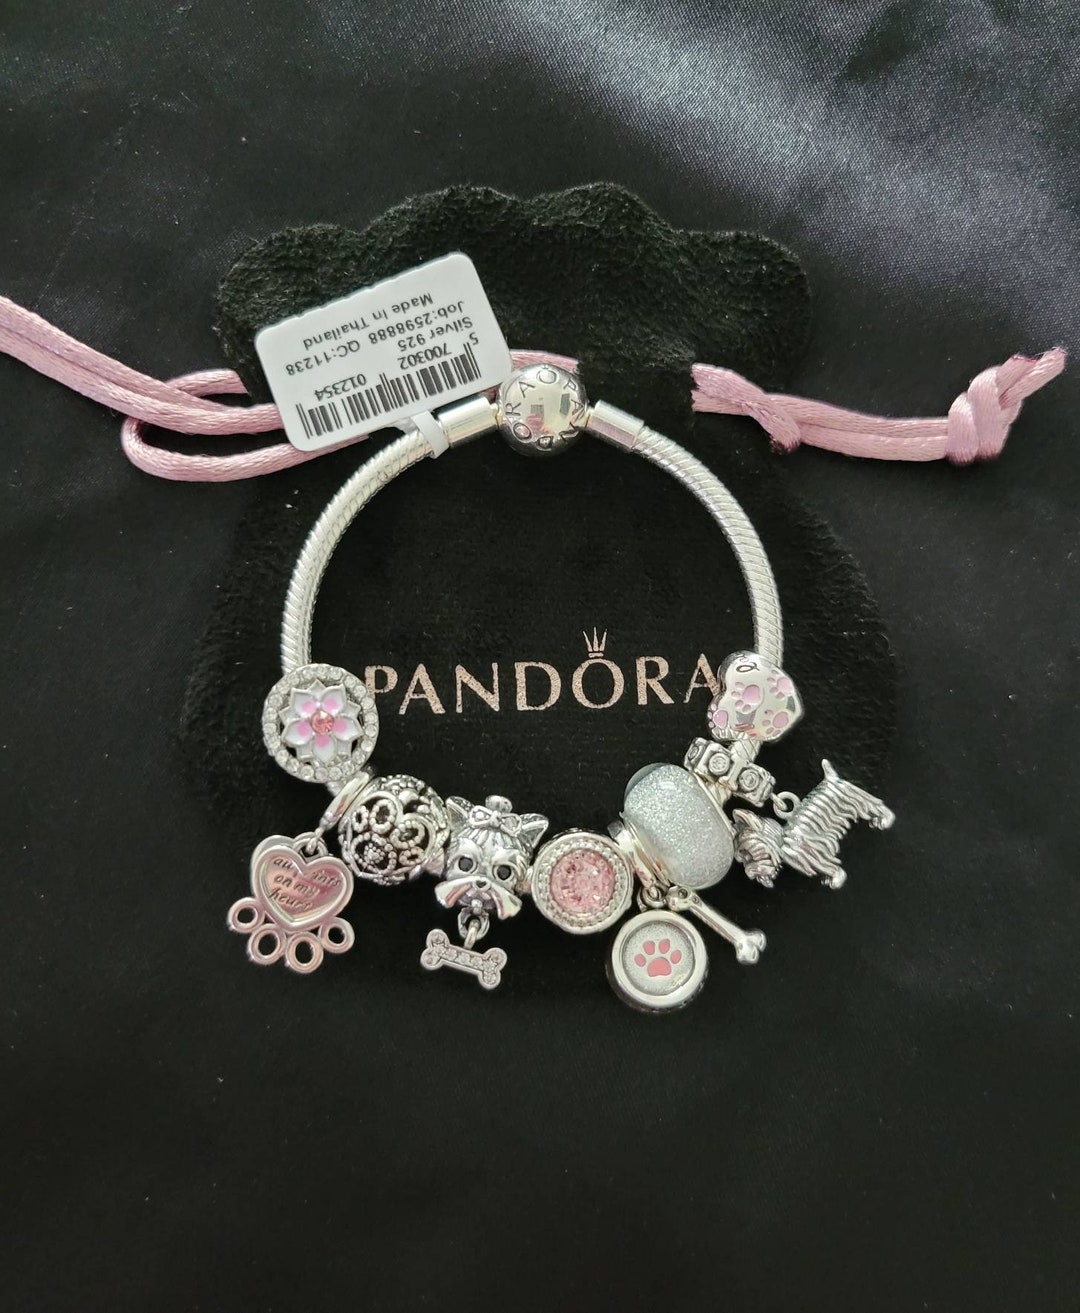 Pandora Bracelet With Yorkshire Terrier Themed Charms - Etsy